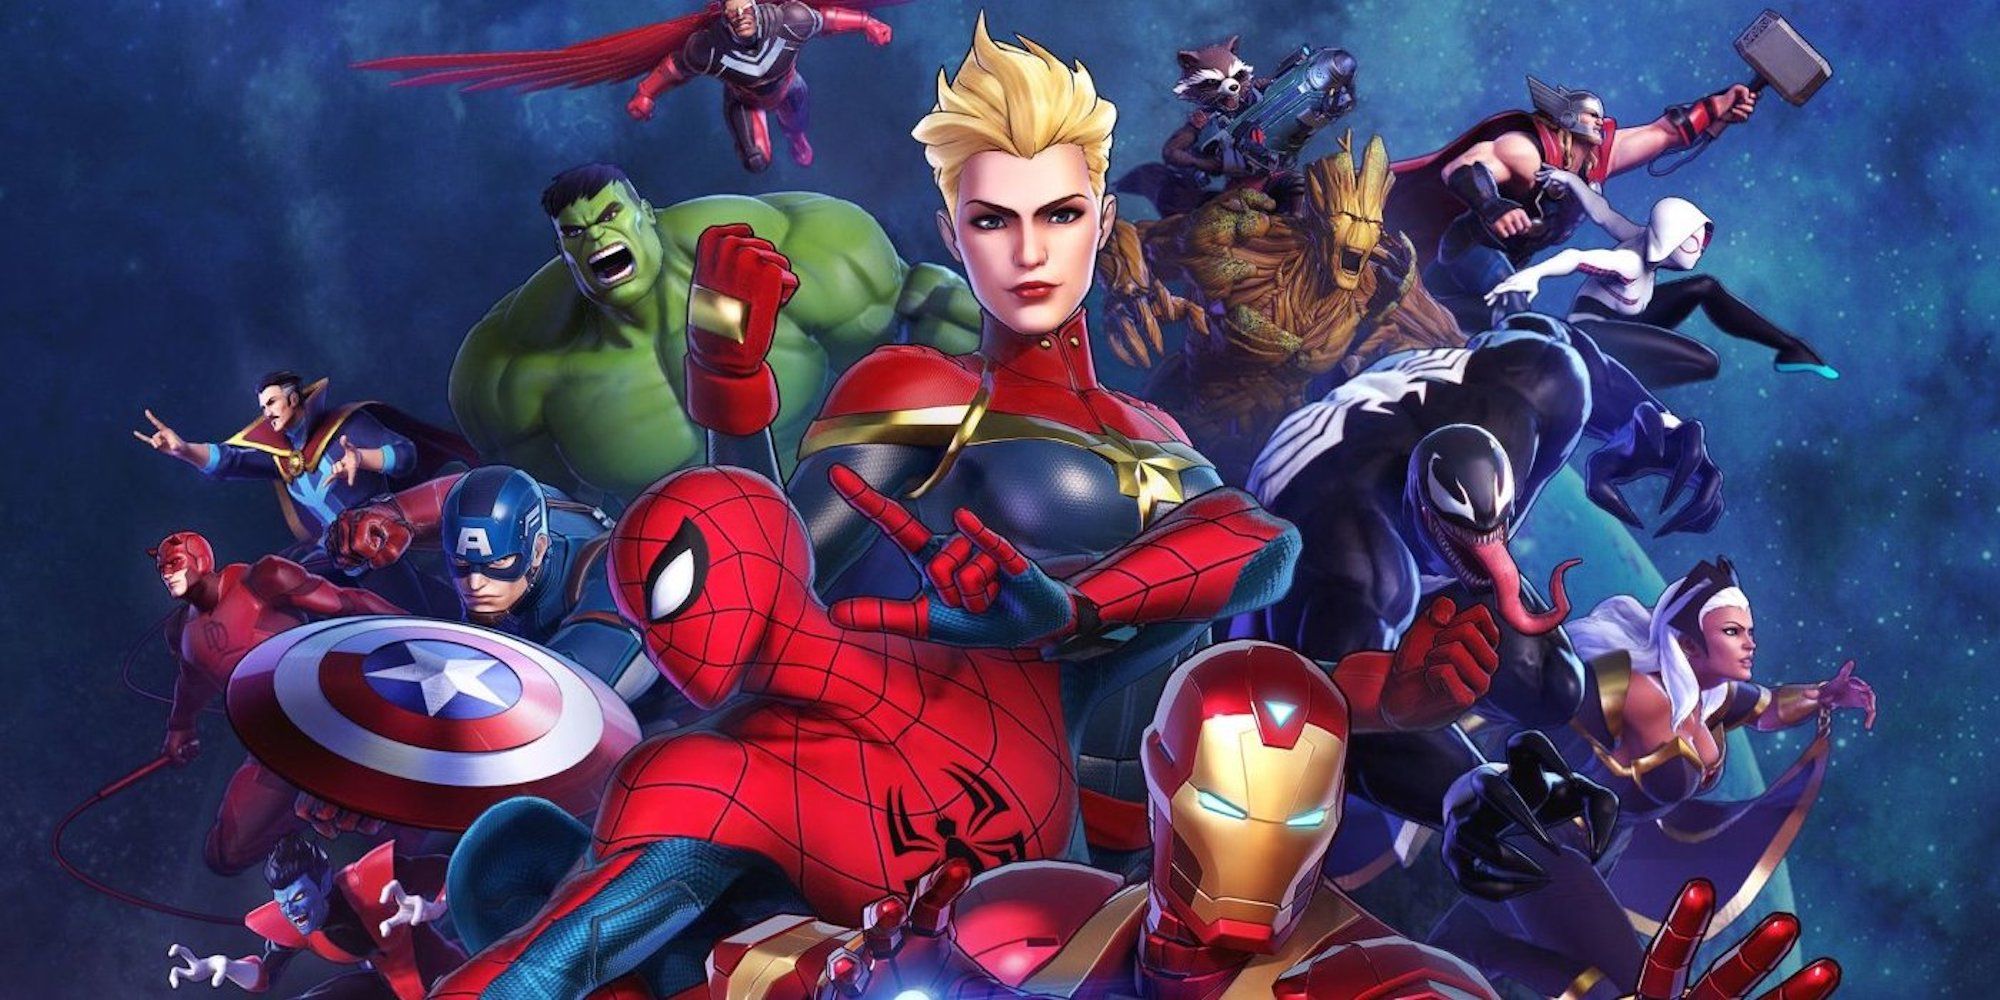 Promotional art featuring characters from Marvel Ultimate Alliance 3